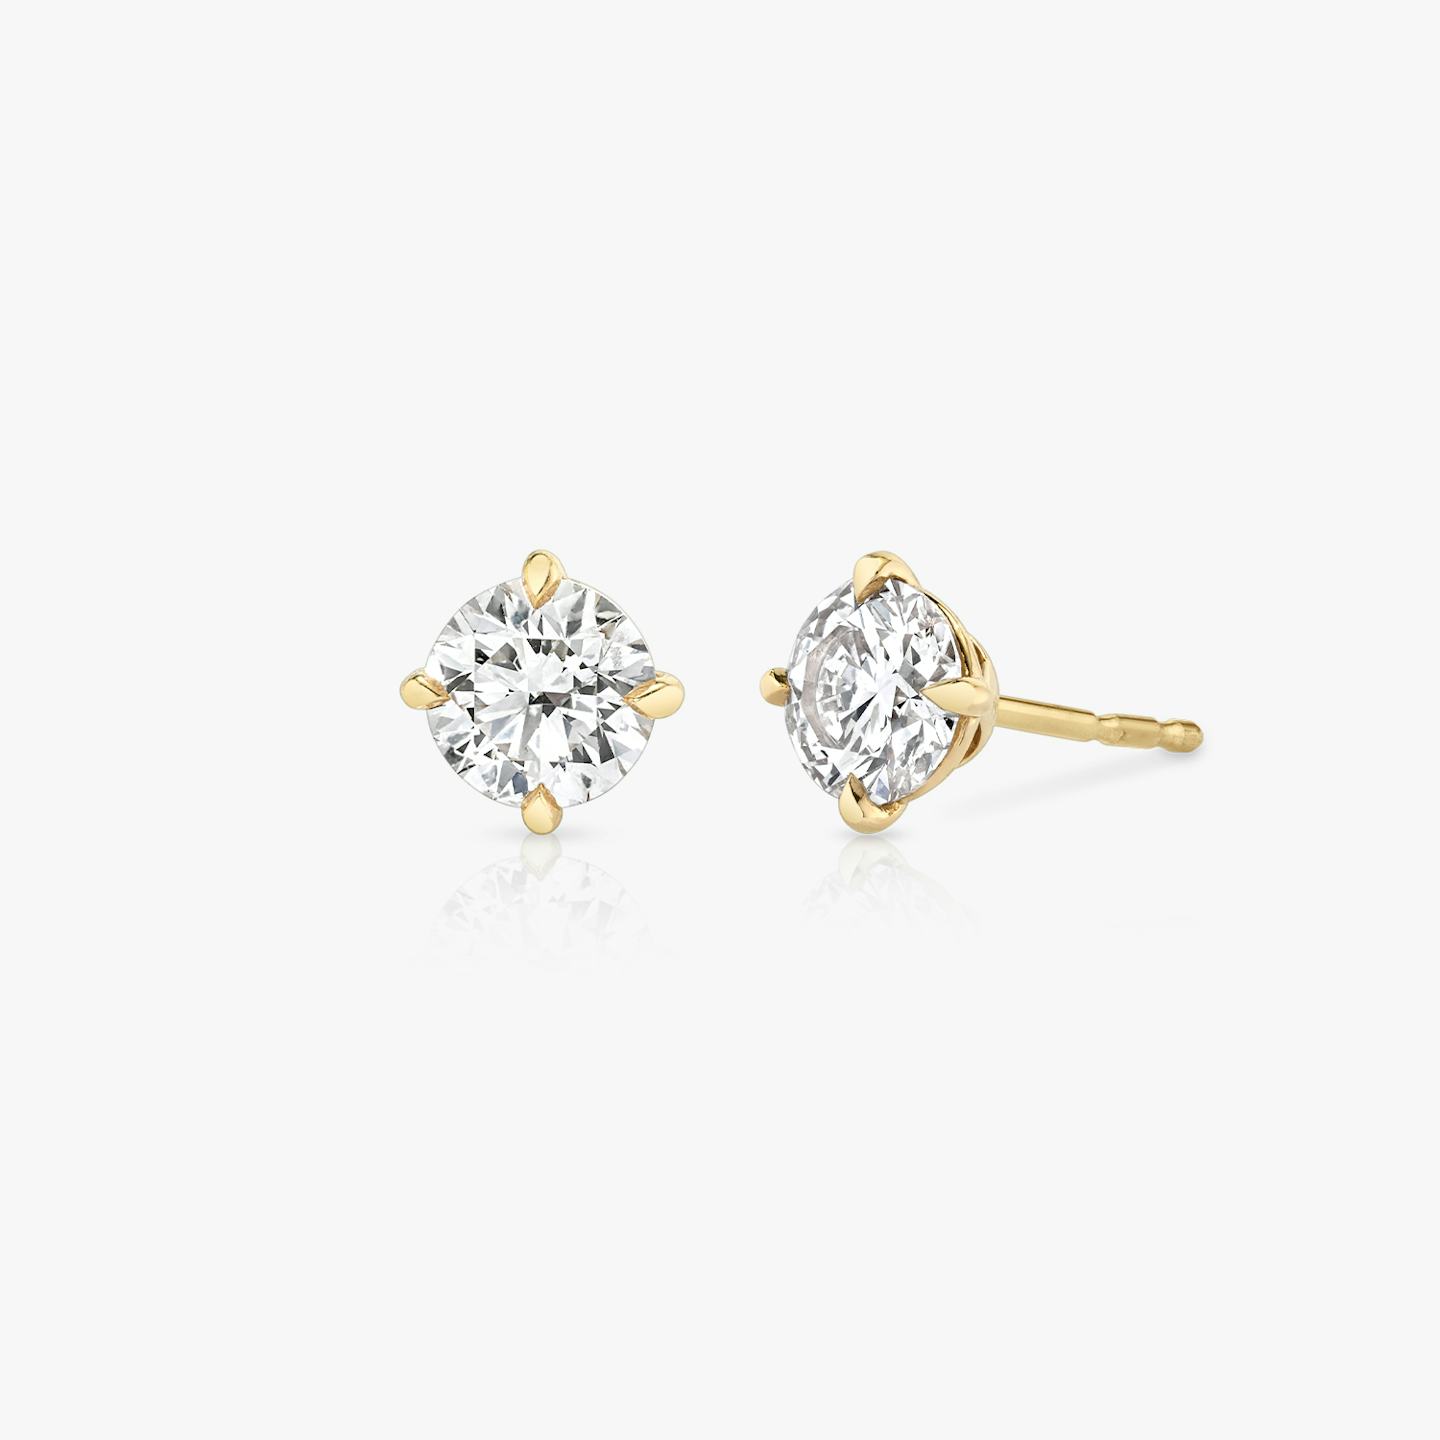 18ct Yellow Gold Brilliant Cut Diamond Solitaire Stud Earrings